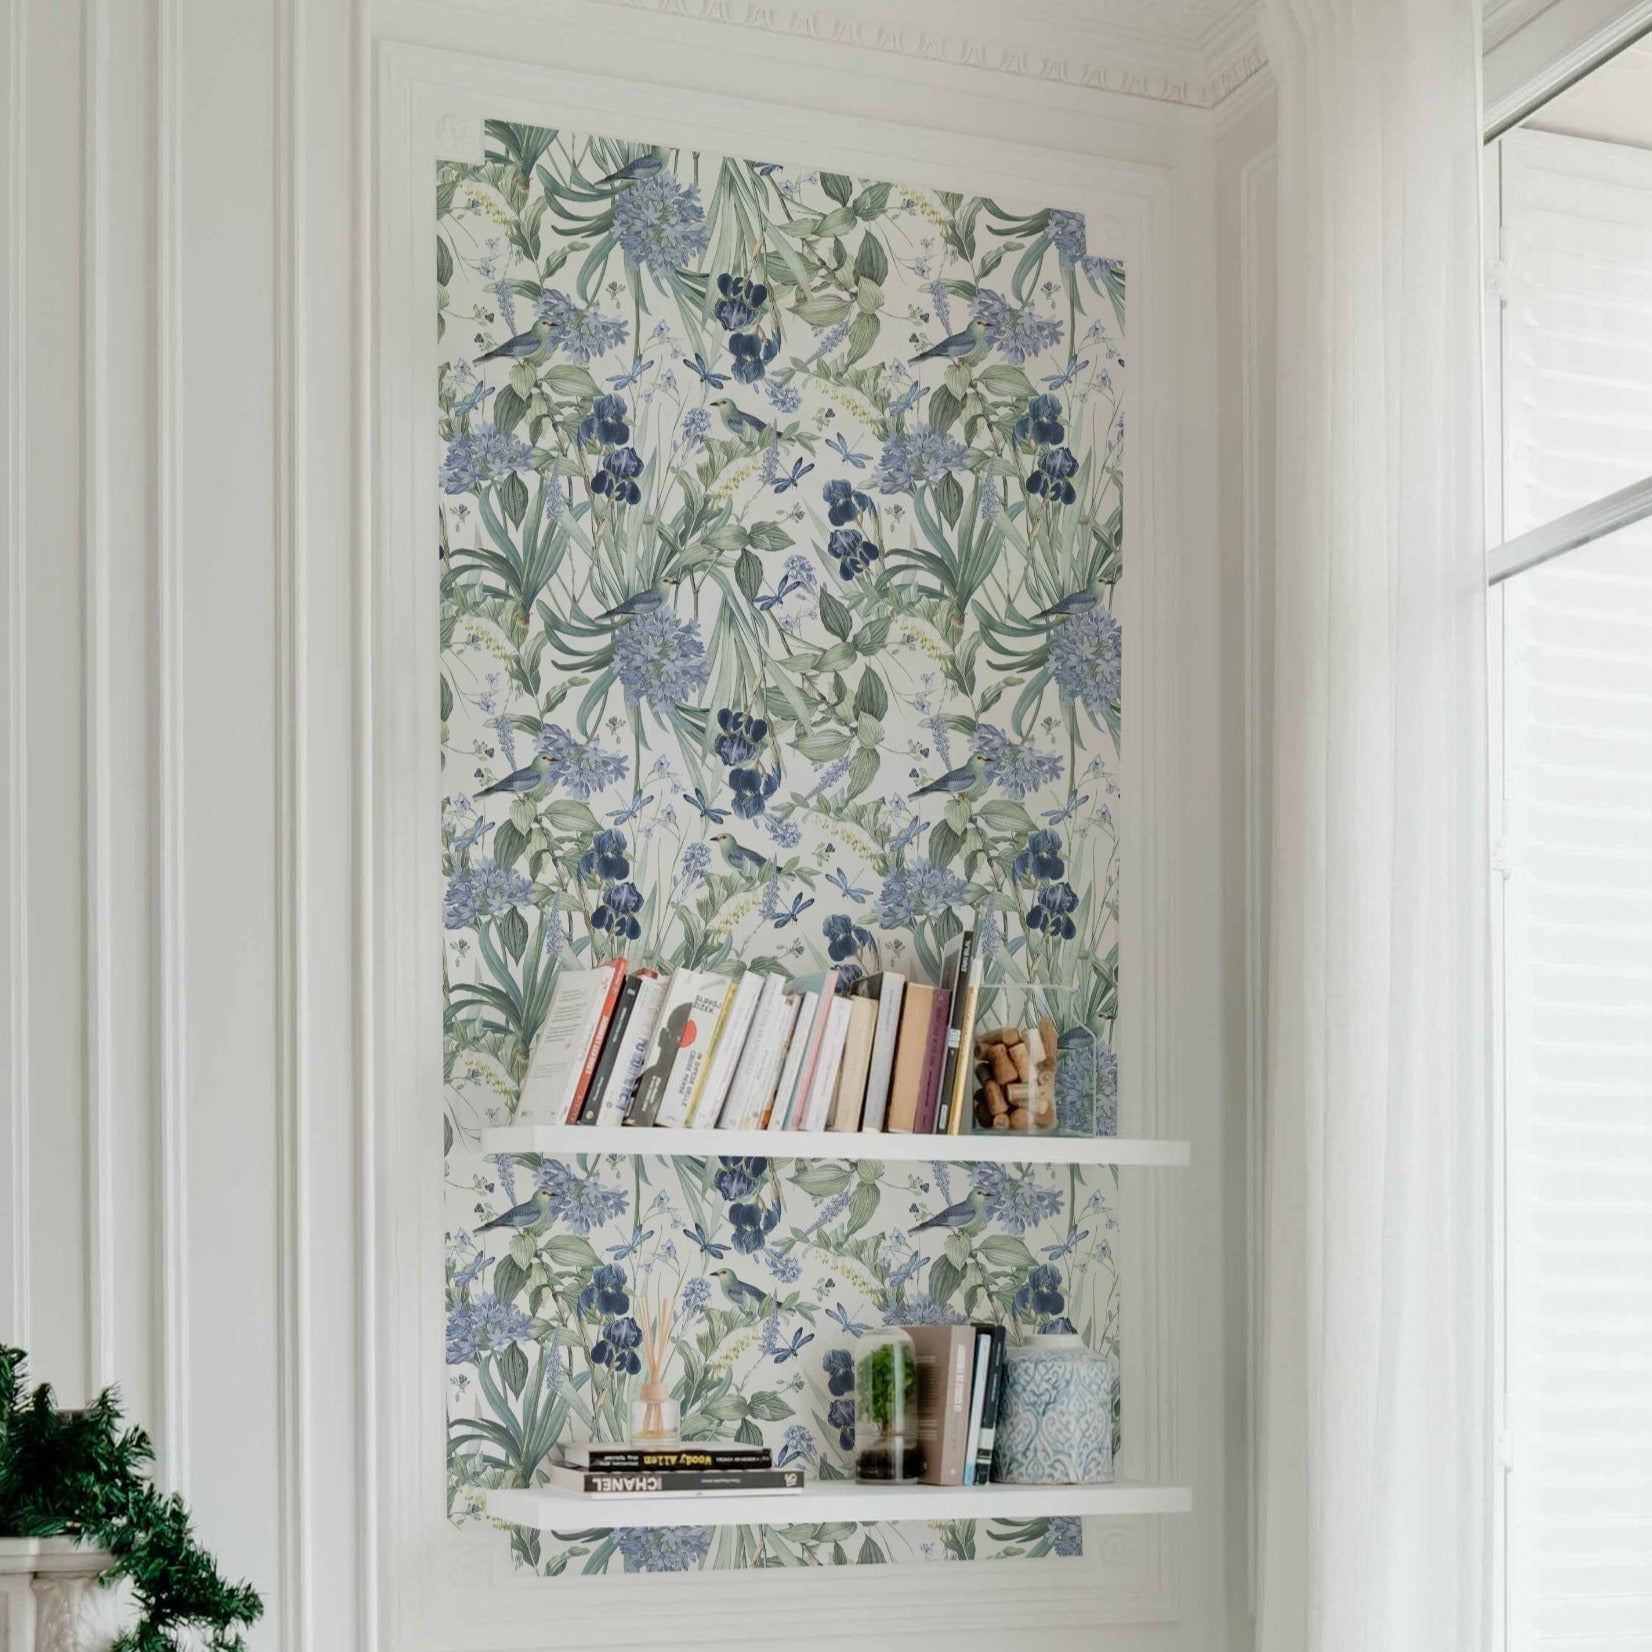 A close-up of the Mint Floral Wallpaper on a wall, offering a detailed view of the wallpaper's intricate design. The pattern includes various shades of blue flowers and green leaves, complemented by small birds and dragonflies, creating a tranquil natural scene.